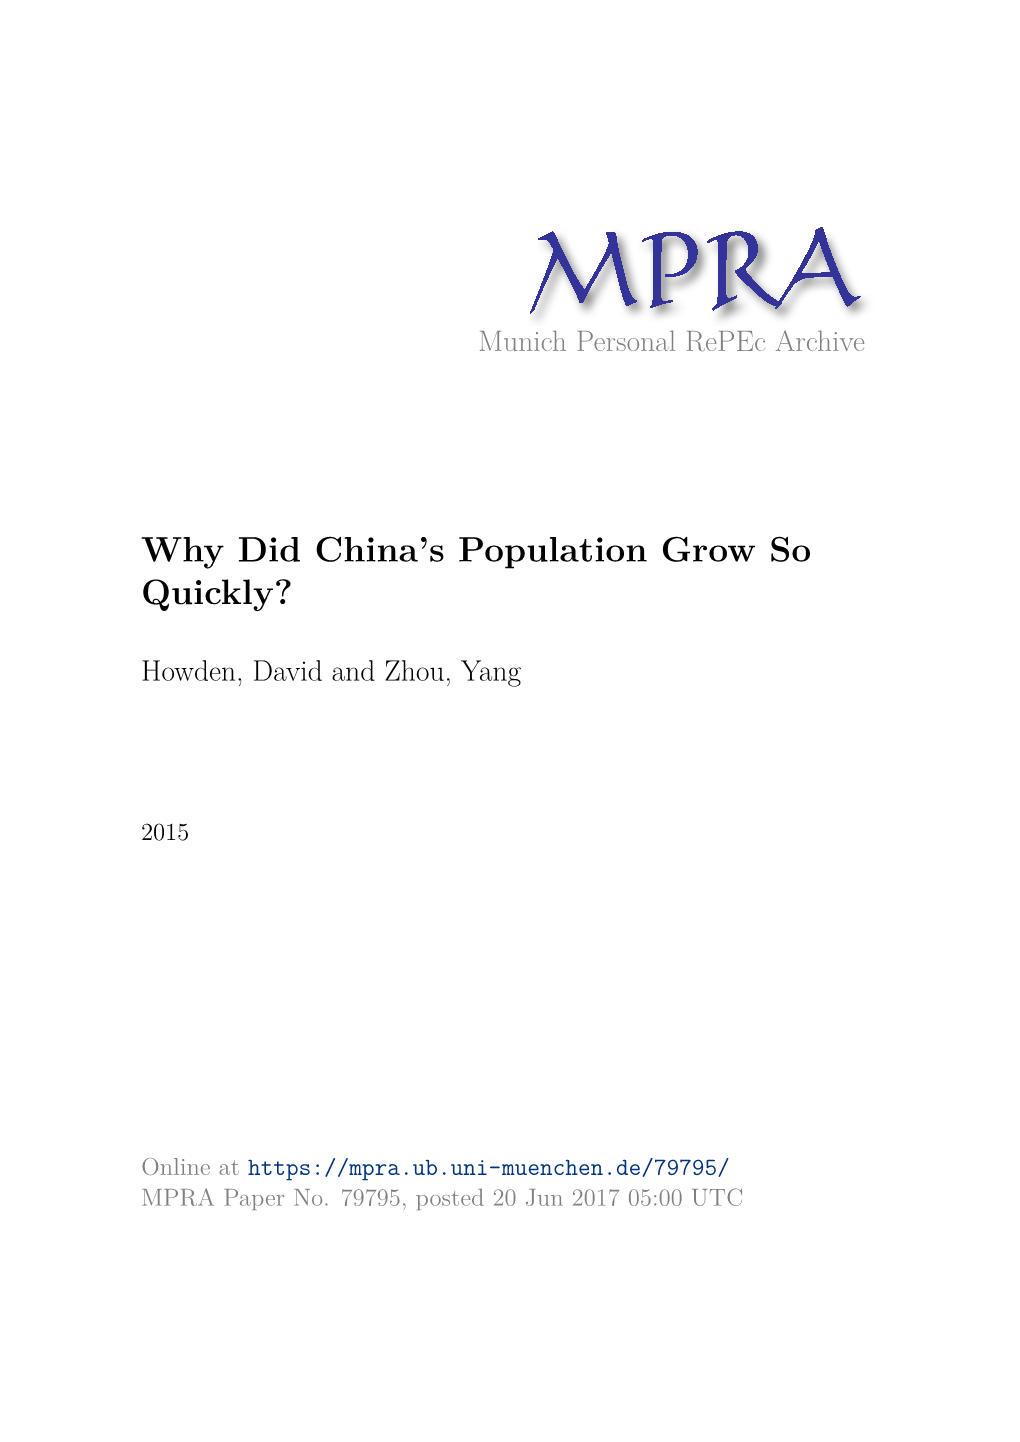 Why Did China's Population Grow So Quickly